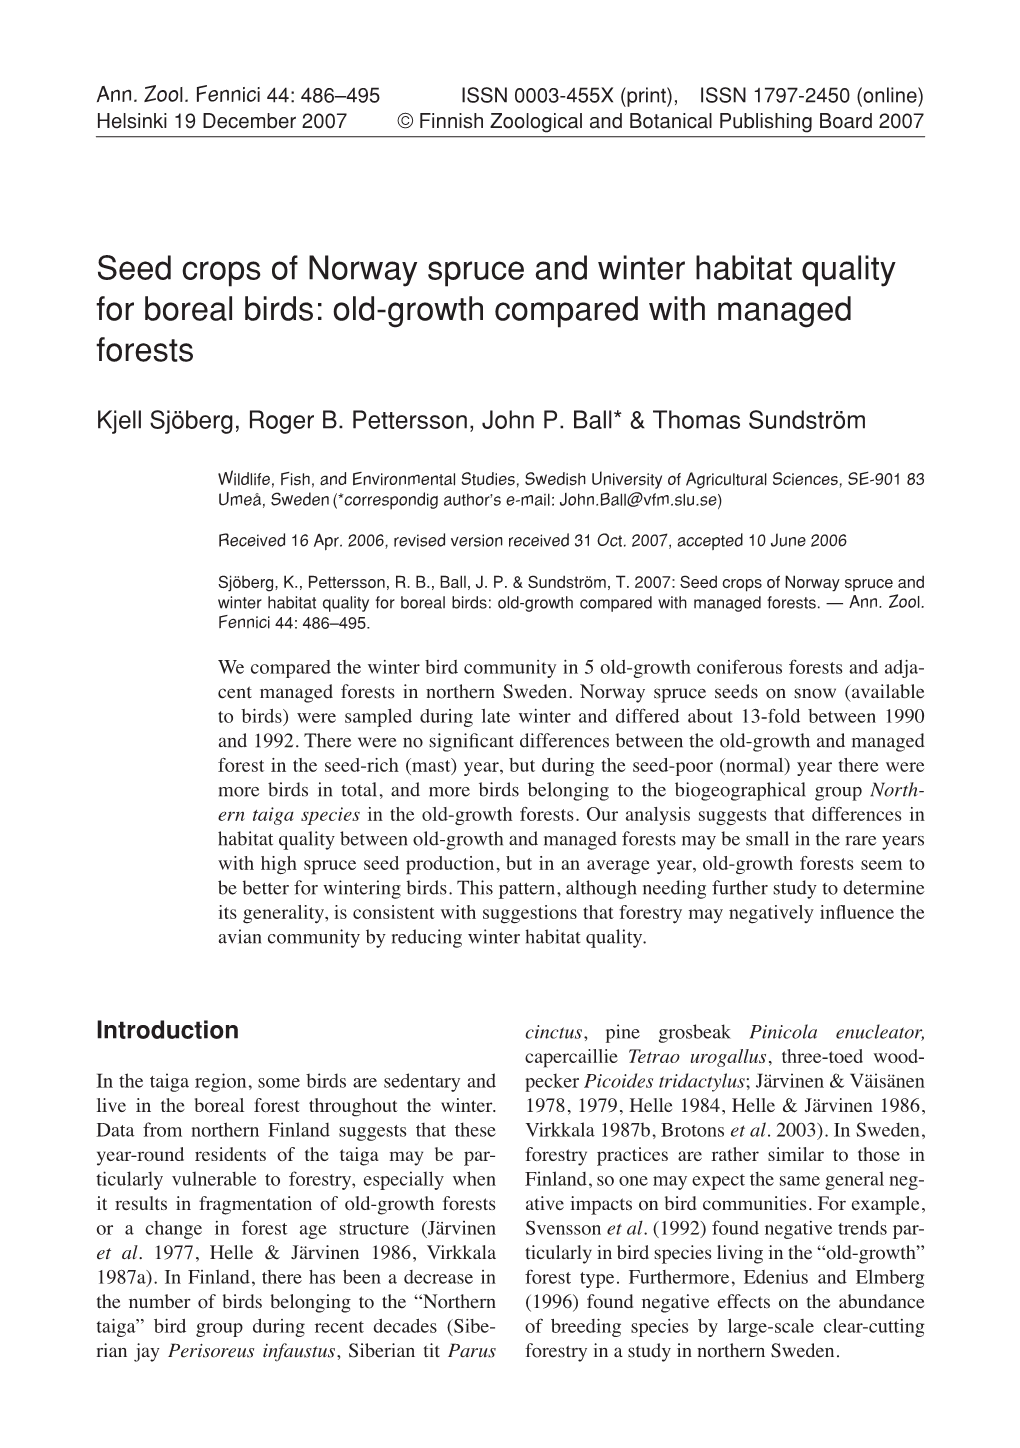 Seed Crops of Norway Spruce and Winter Habitat Quality for Boreal Birds: Old-Growth Compared with Managed Forests